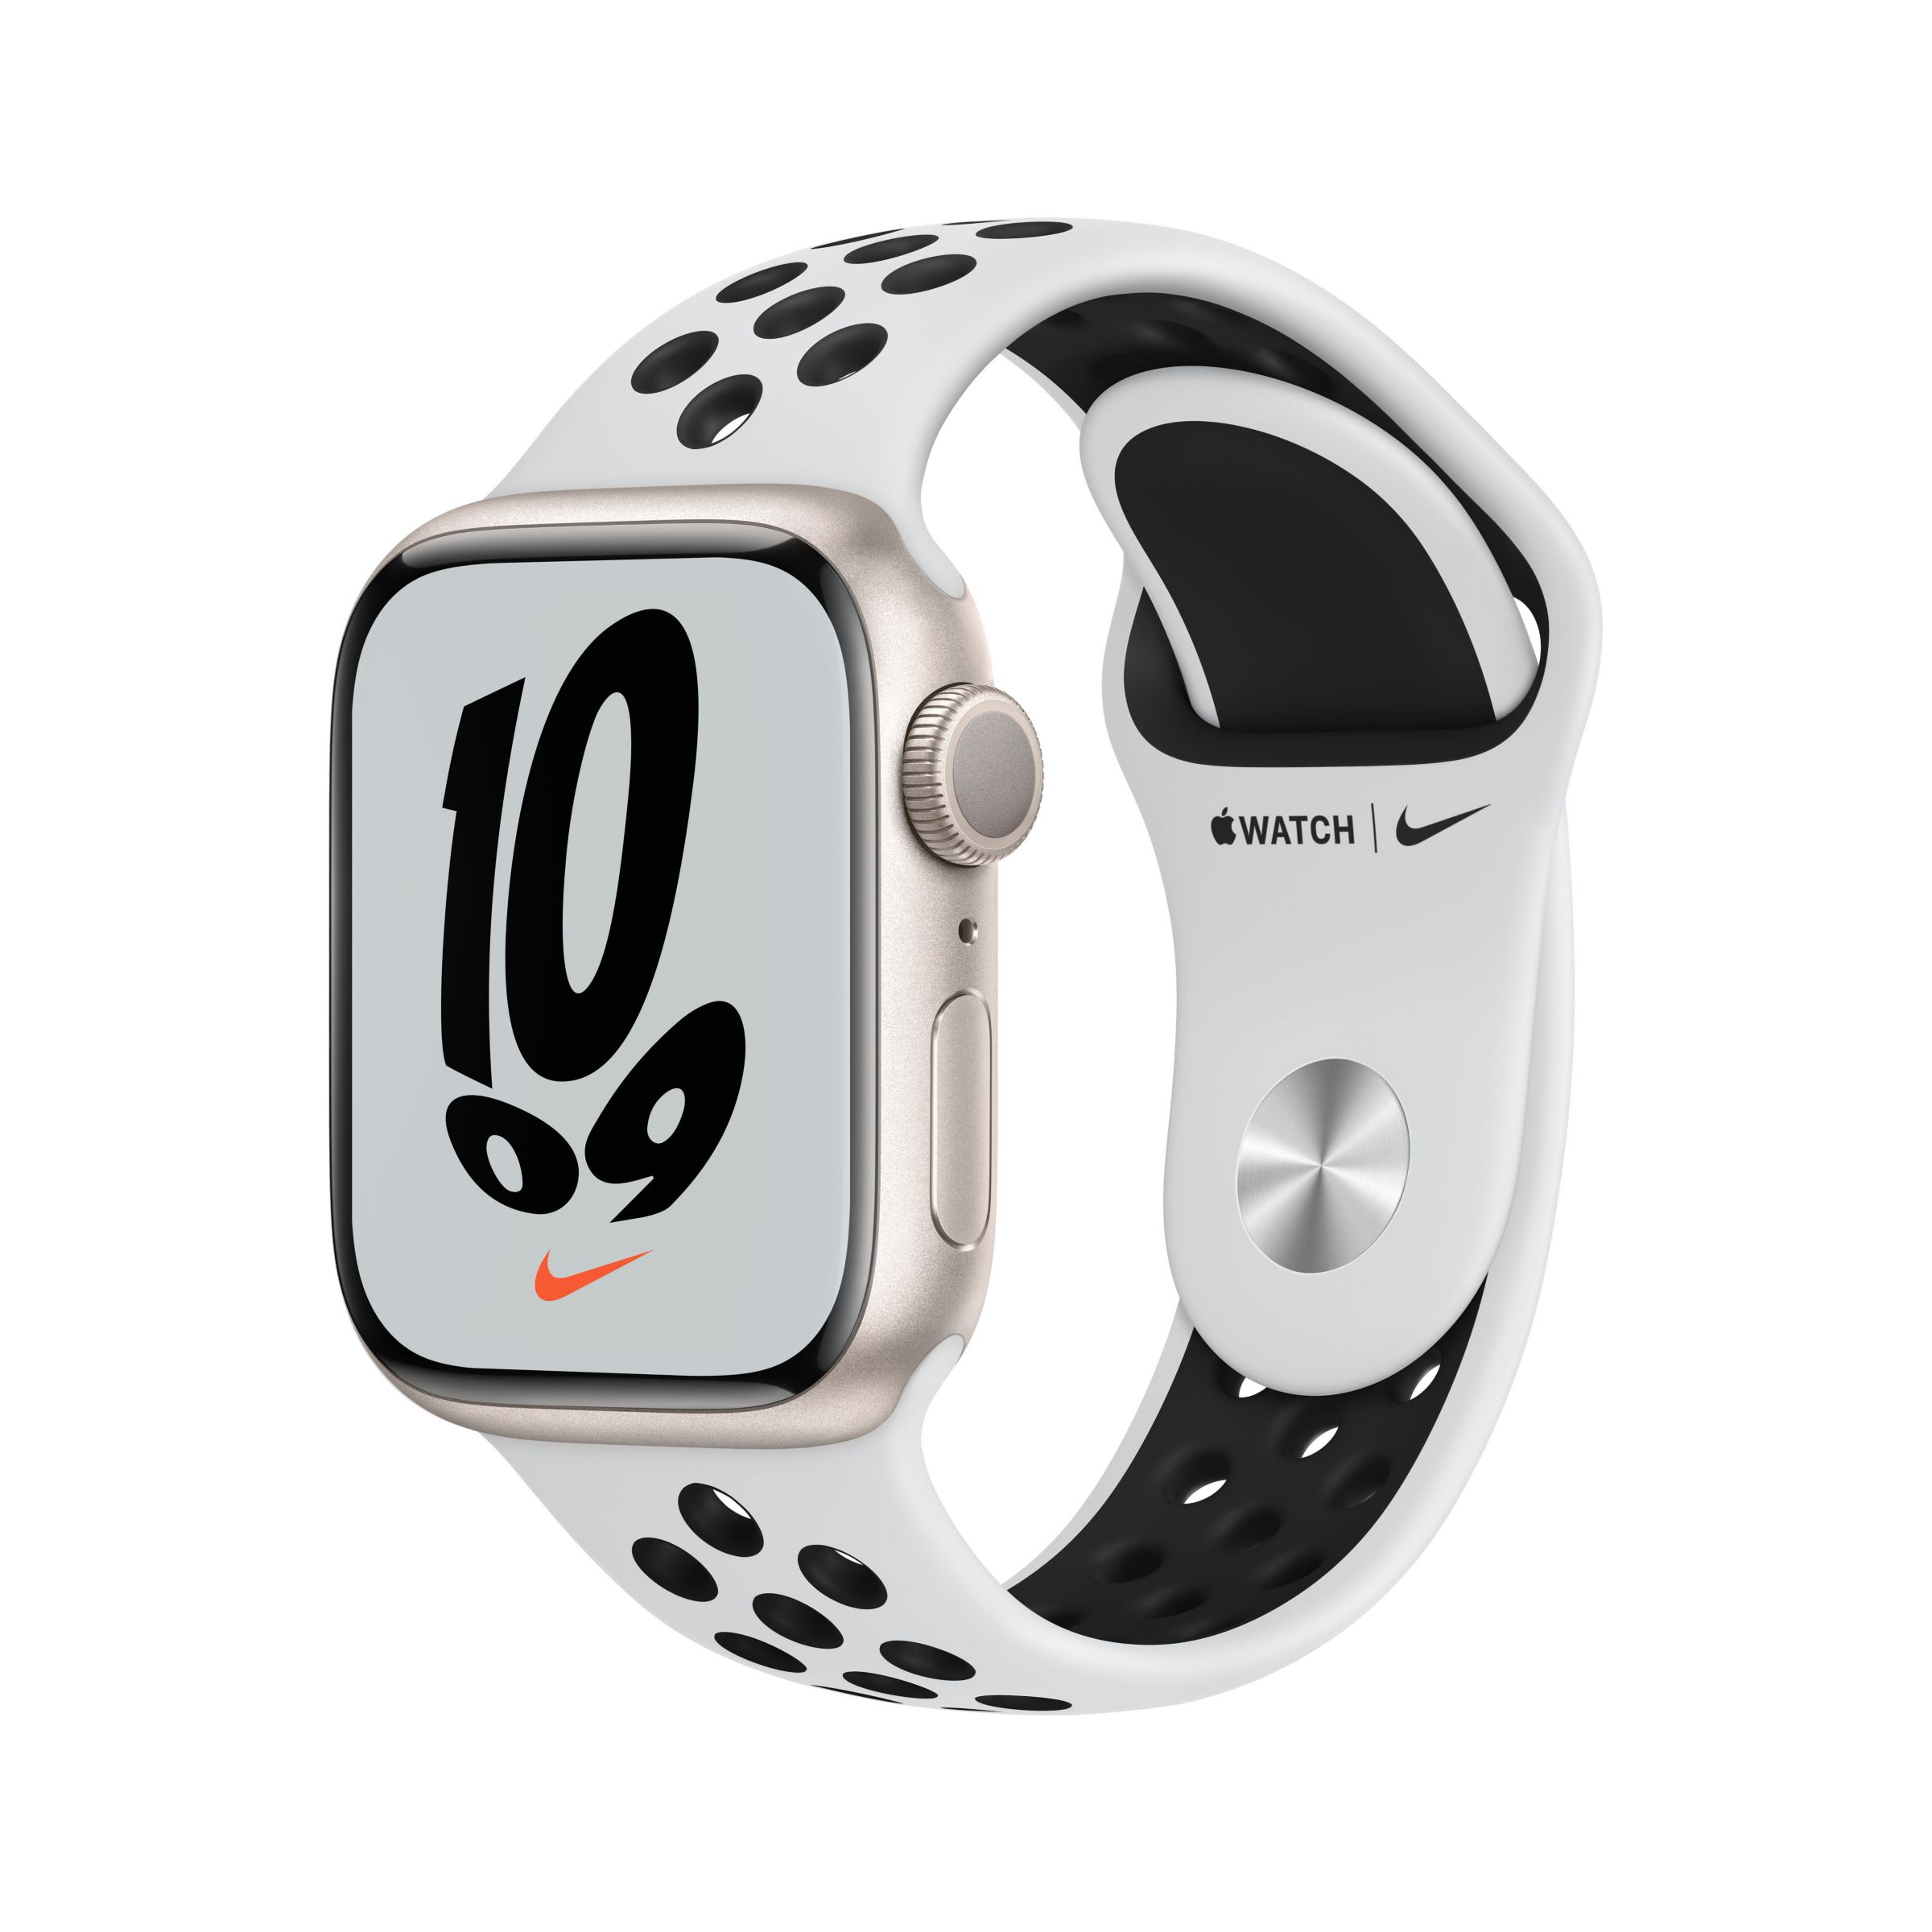 Whats The Difference Between The Apple Watch And The Nike Apple Watch ...